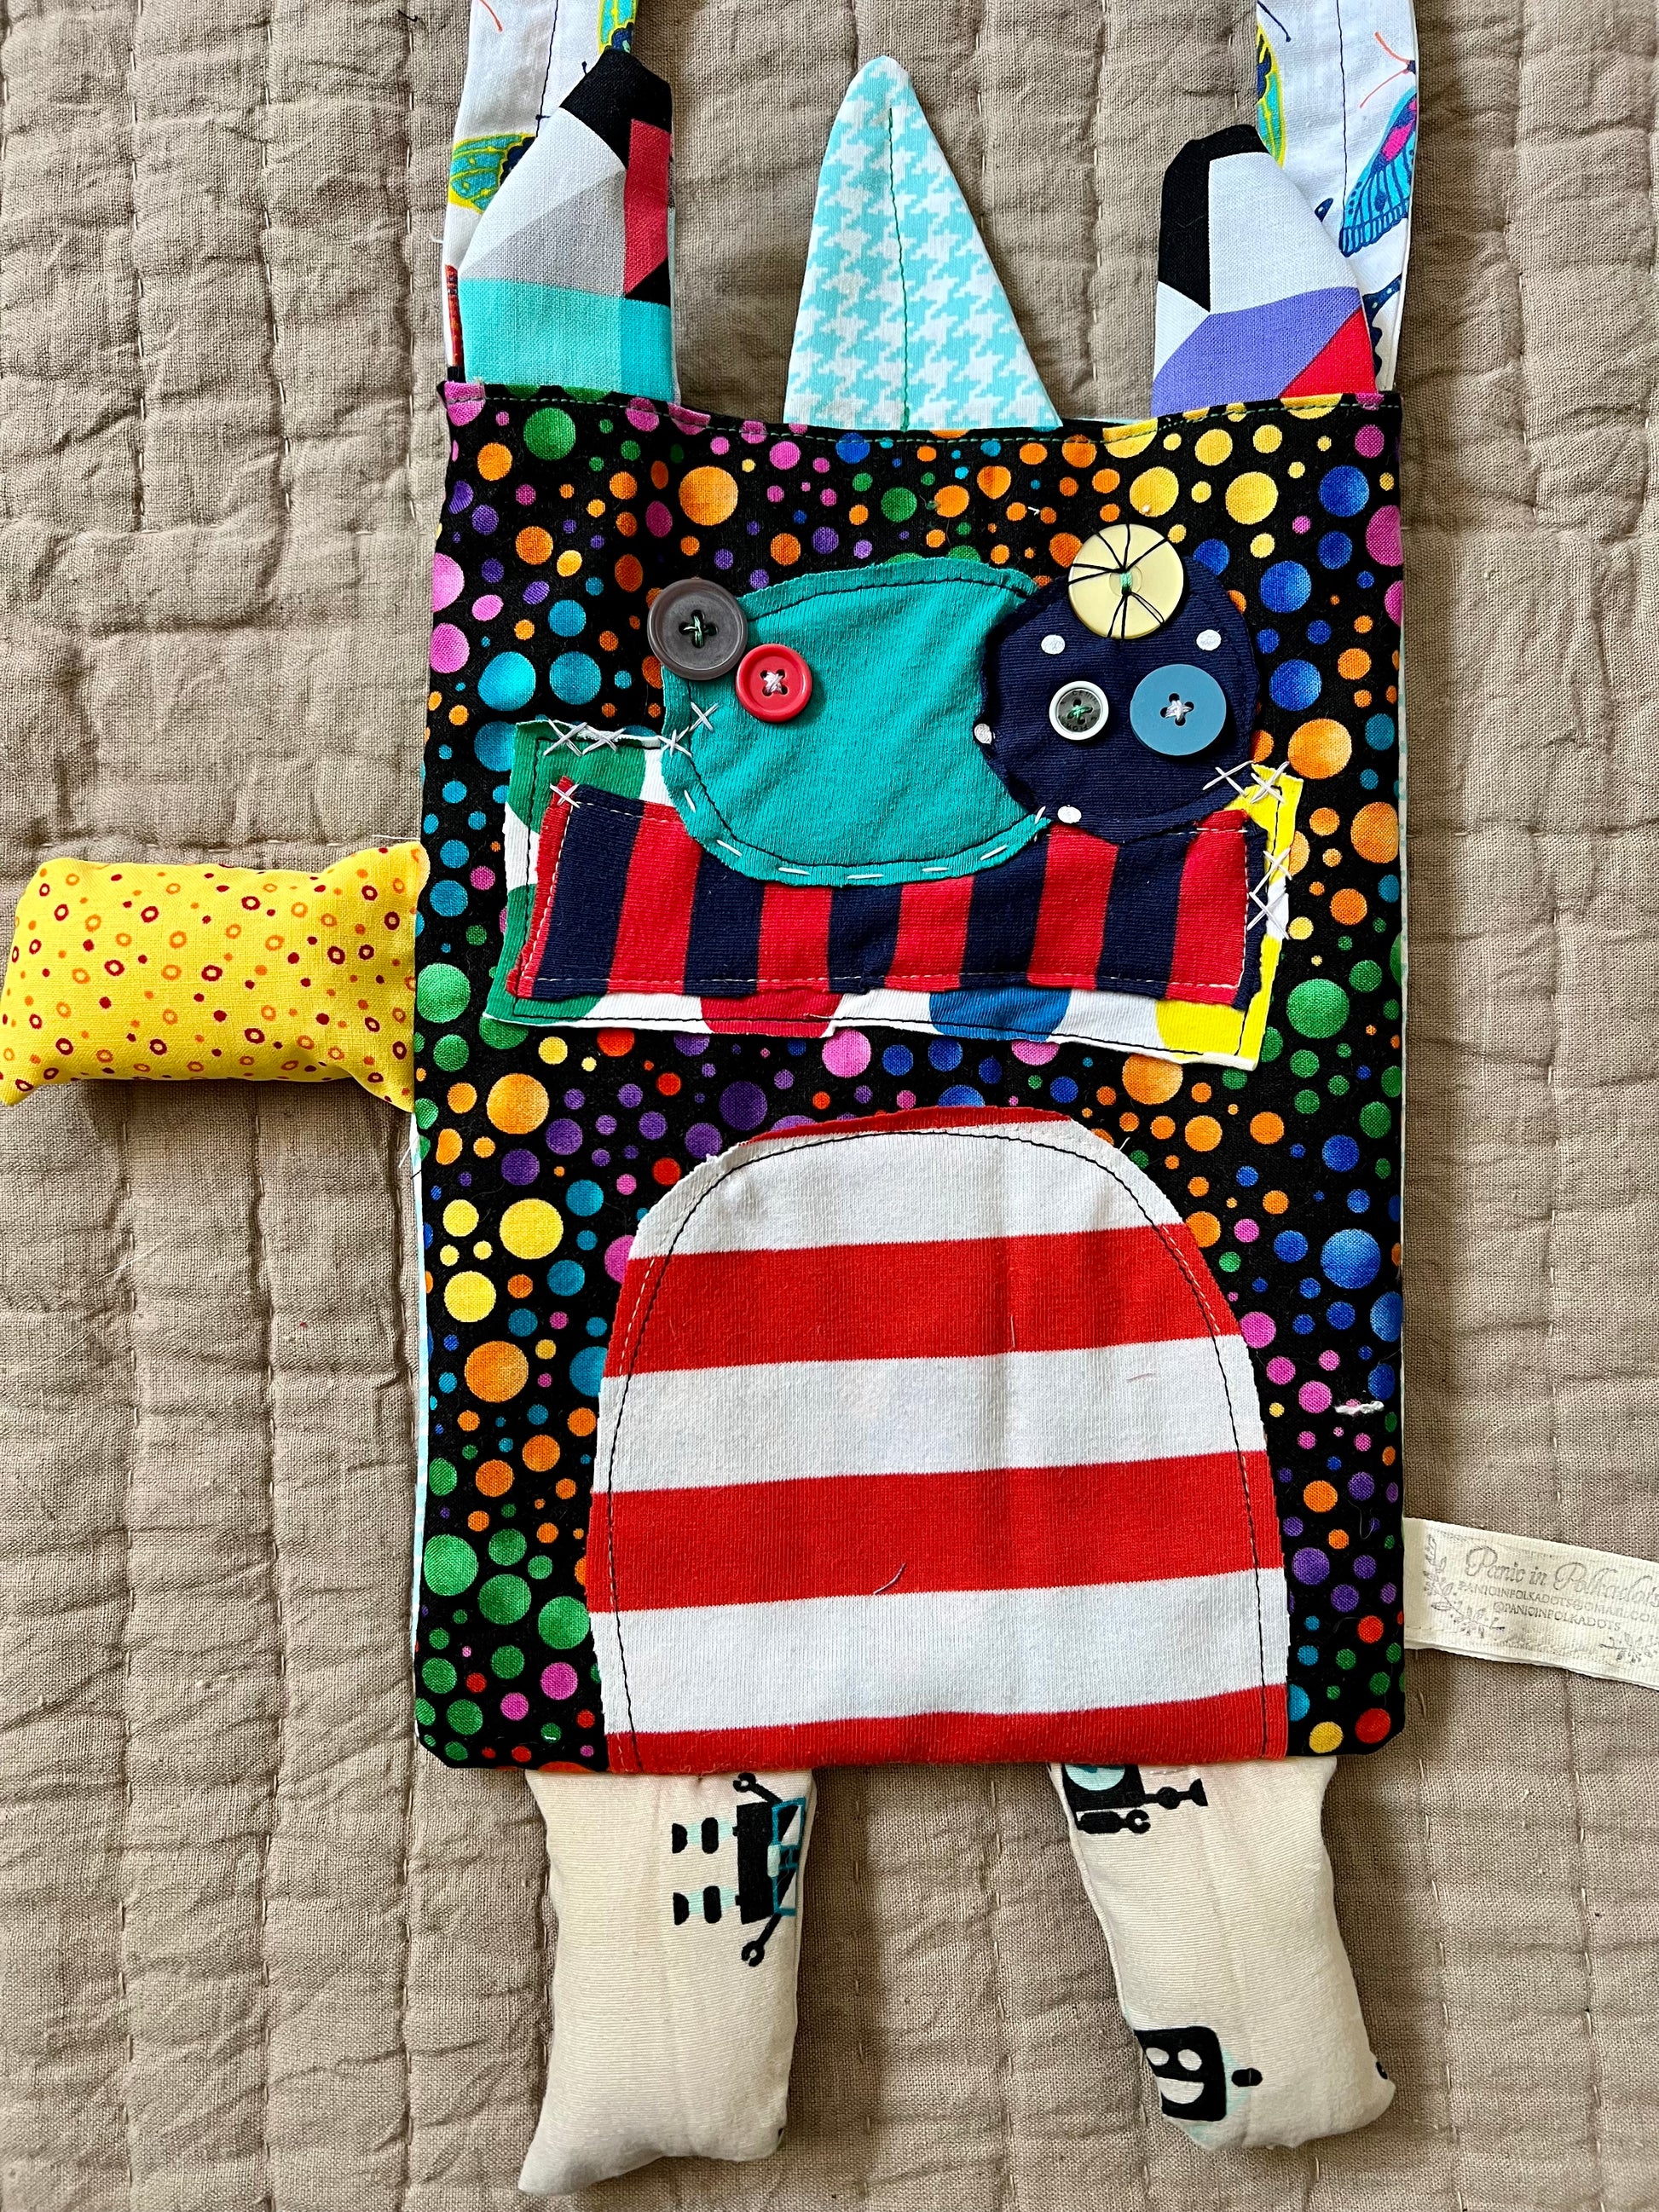 Monster tote bag. Body is bold bright polkadots, multiple button eyes, and a red and white striped tummy.